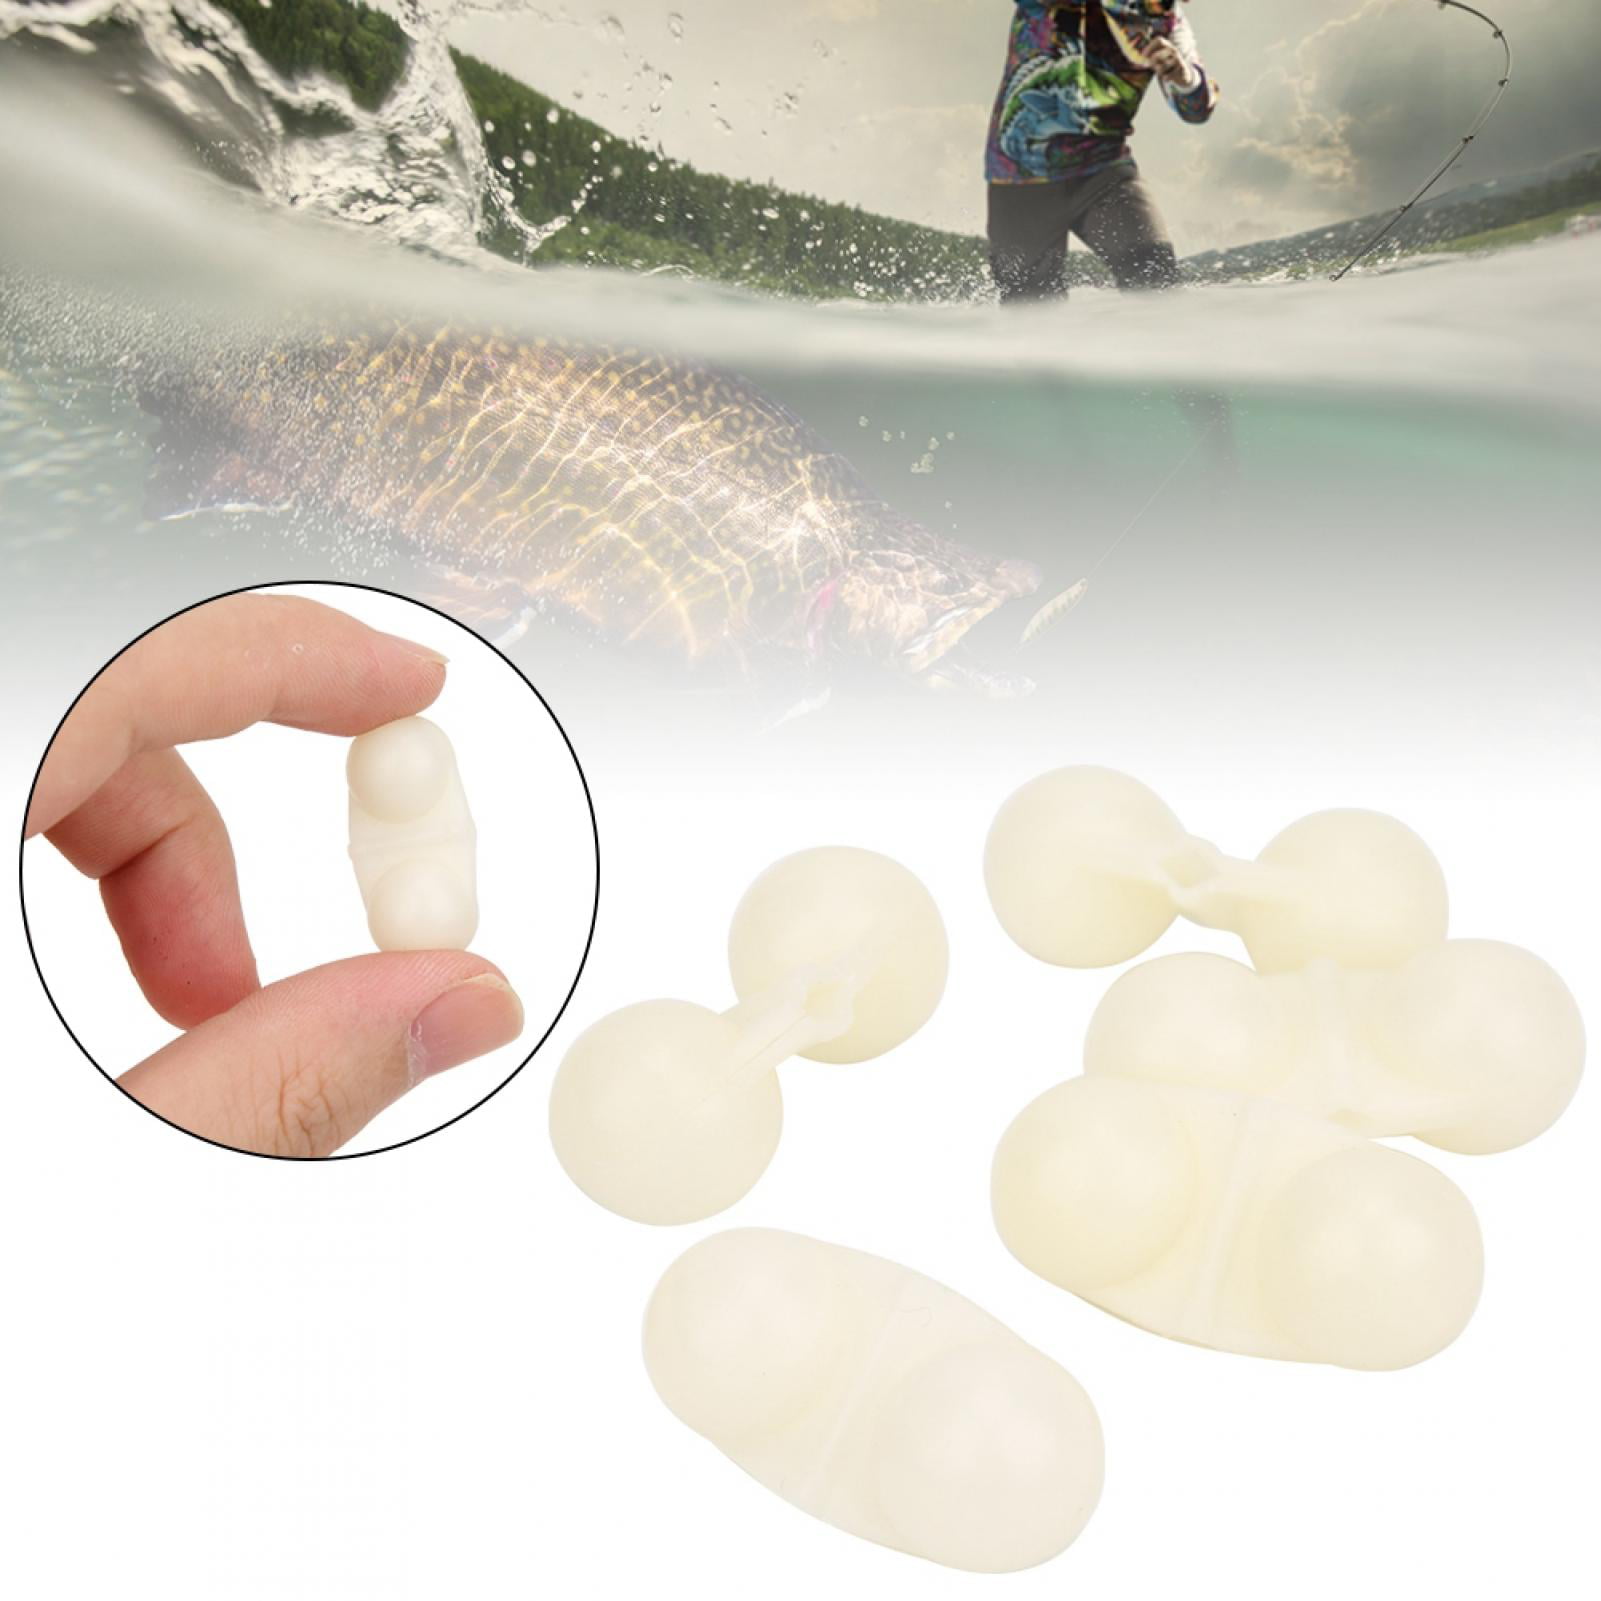 Portable ABS Double Rattle Sea Fishing Attractor Bell Beads Accessory for Luring Fish Keenso 40Pcs Fishing Double Rattle